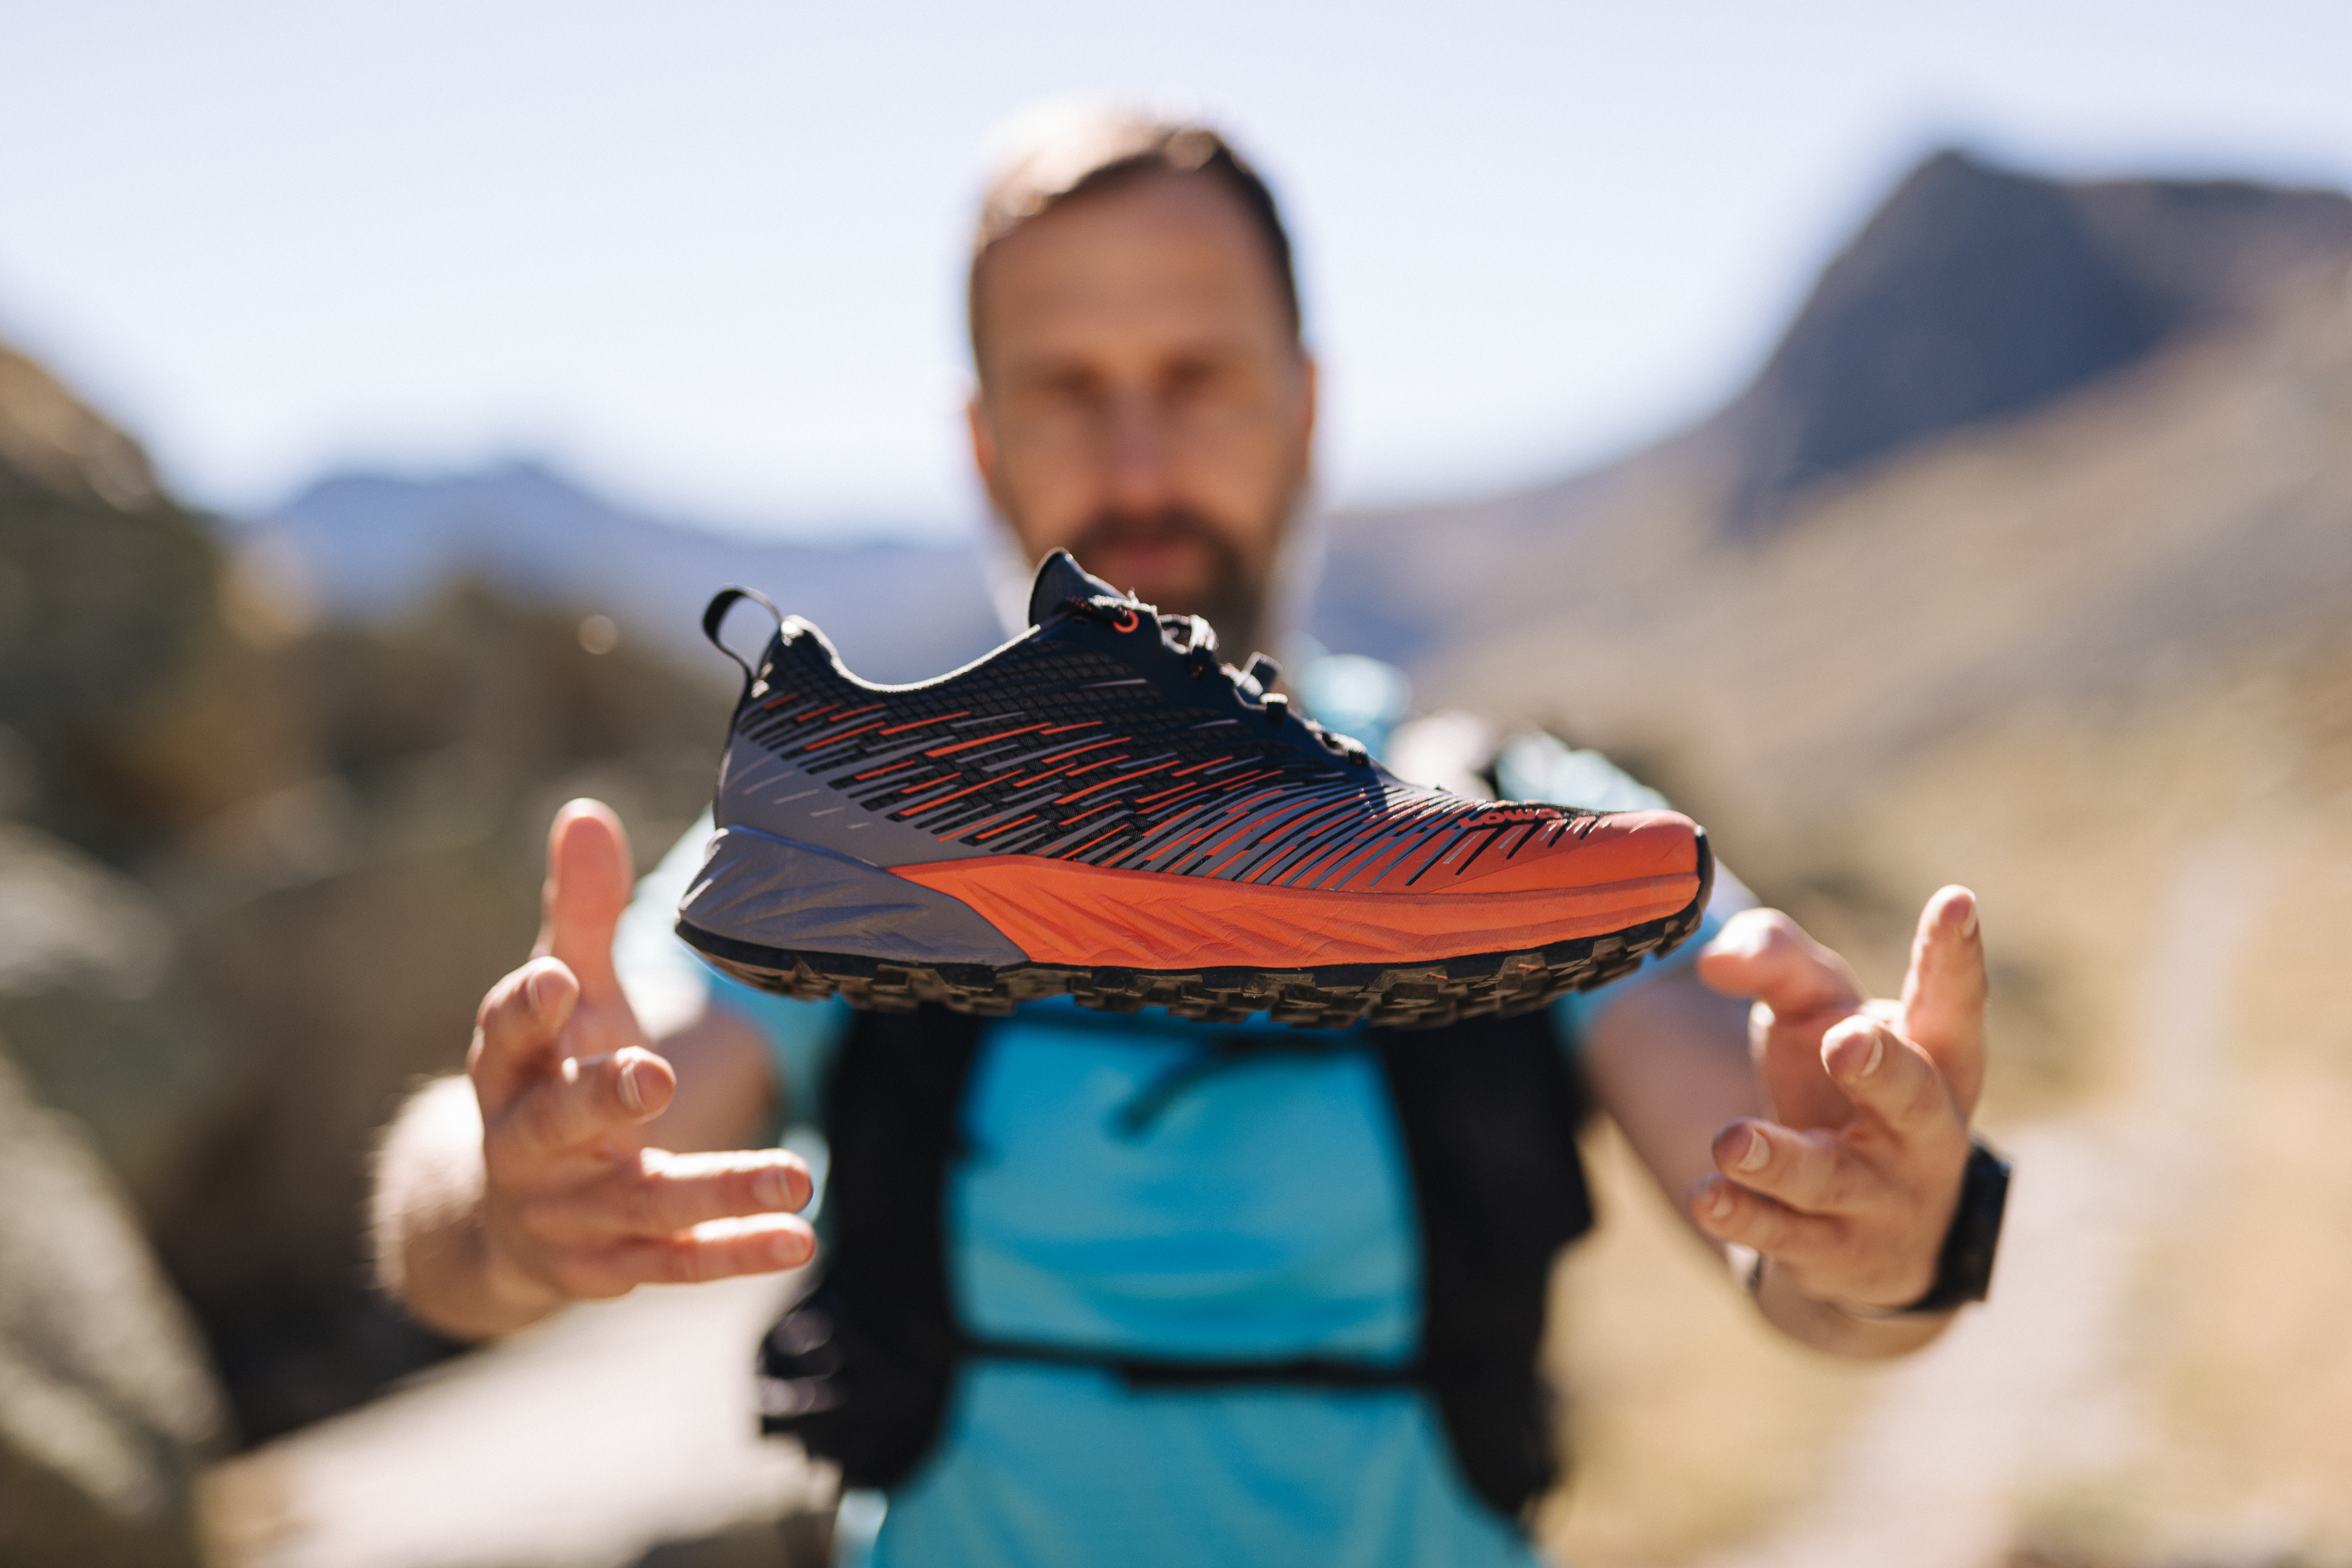 Free Gear Fridays: Win a Pair of LOWA All-Terrain Running Shoes